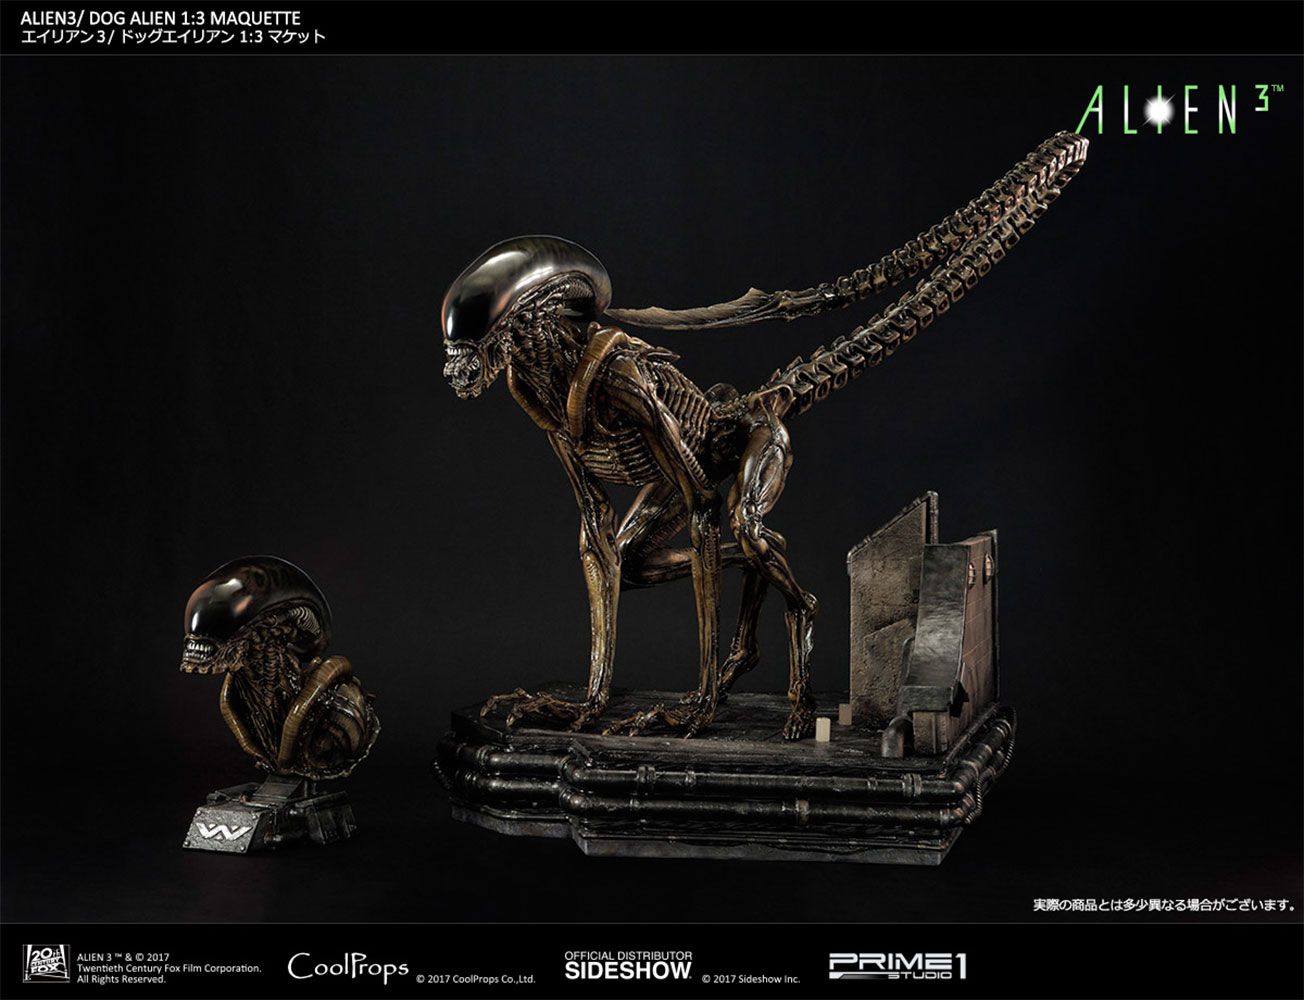 Alien 3 Dog Alien Deluxe Maquette by CoolProps | Sideshow Collectibles